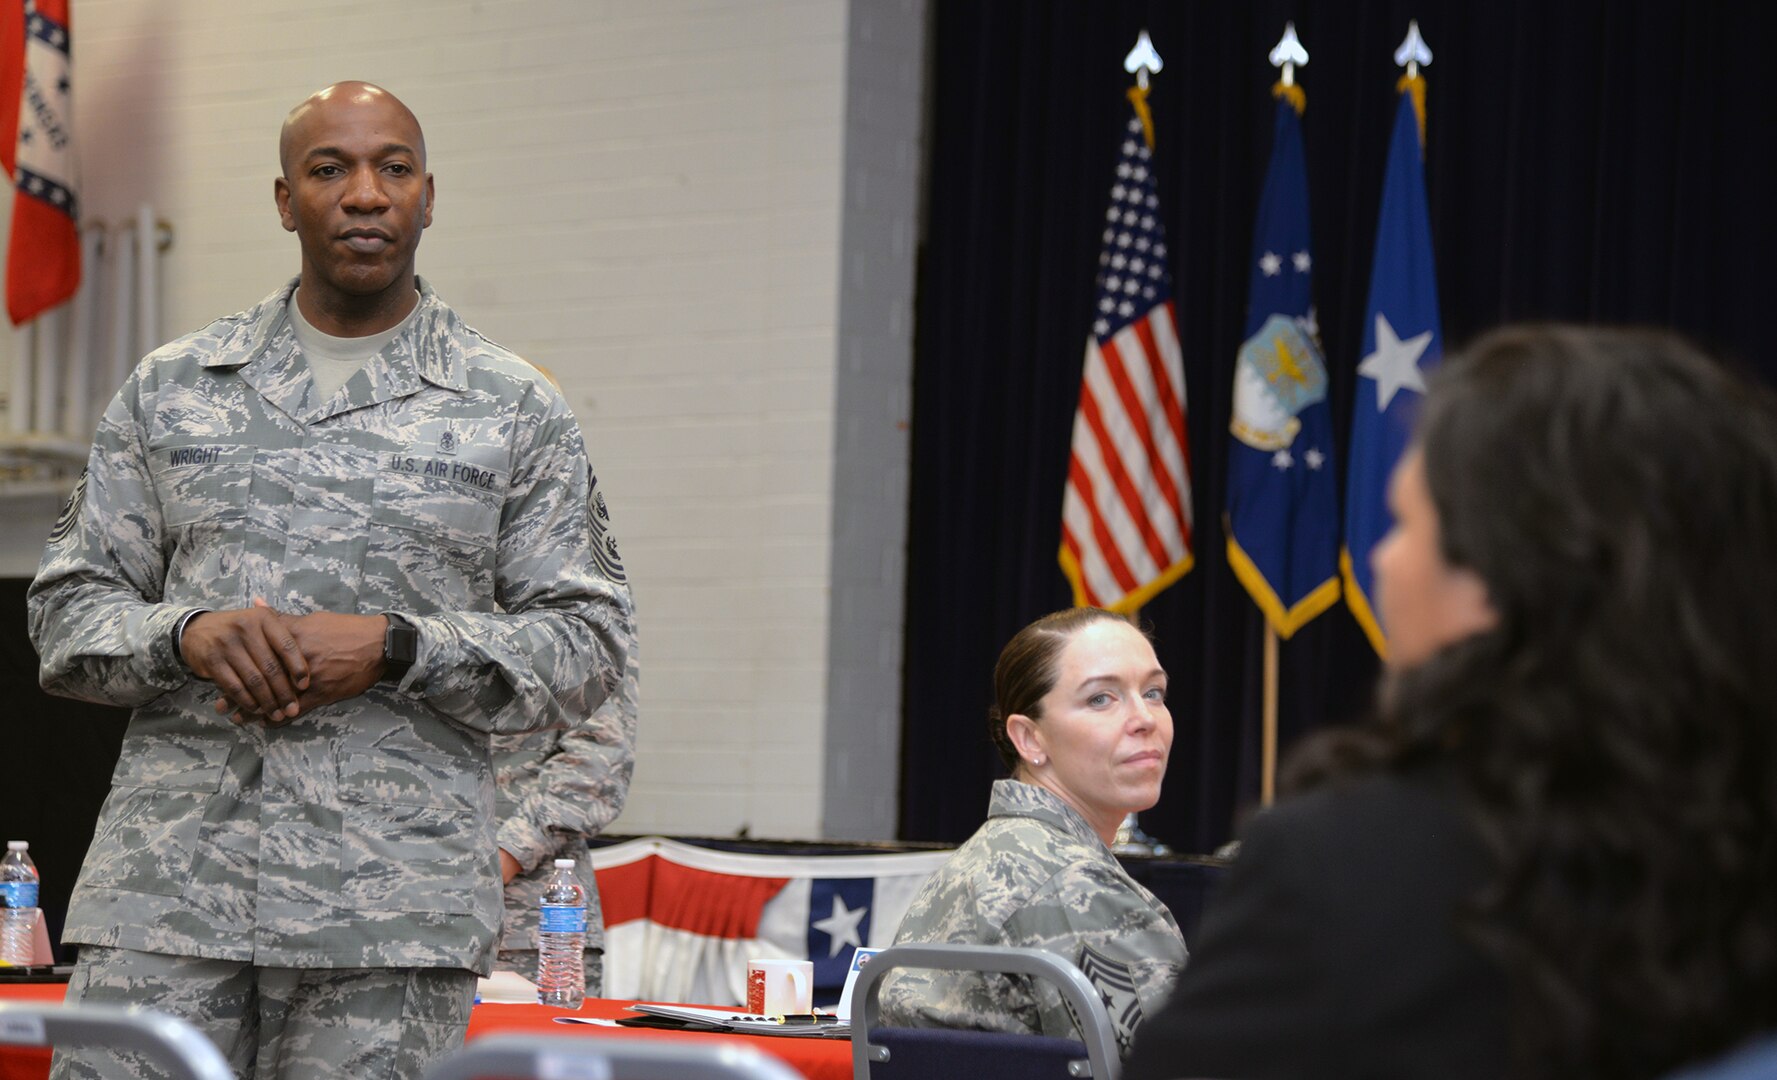 Chief Master Sgt. of the Air Force Kaleth O. Wright listens as Elizabeth Treon, 502nd Air Base Wing Military and Family Readiness Center director, discusses resources available to civilian employees Aug. 1 at Joint Base San Antonio-Fort Sam Houston. The Air Force's senior enlisted leader met with 502nd Air Base Wing leaders to learn about the installation support mission at Joint Base San Antonio.